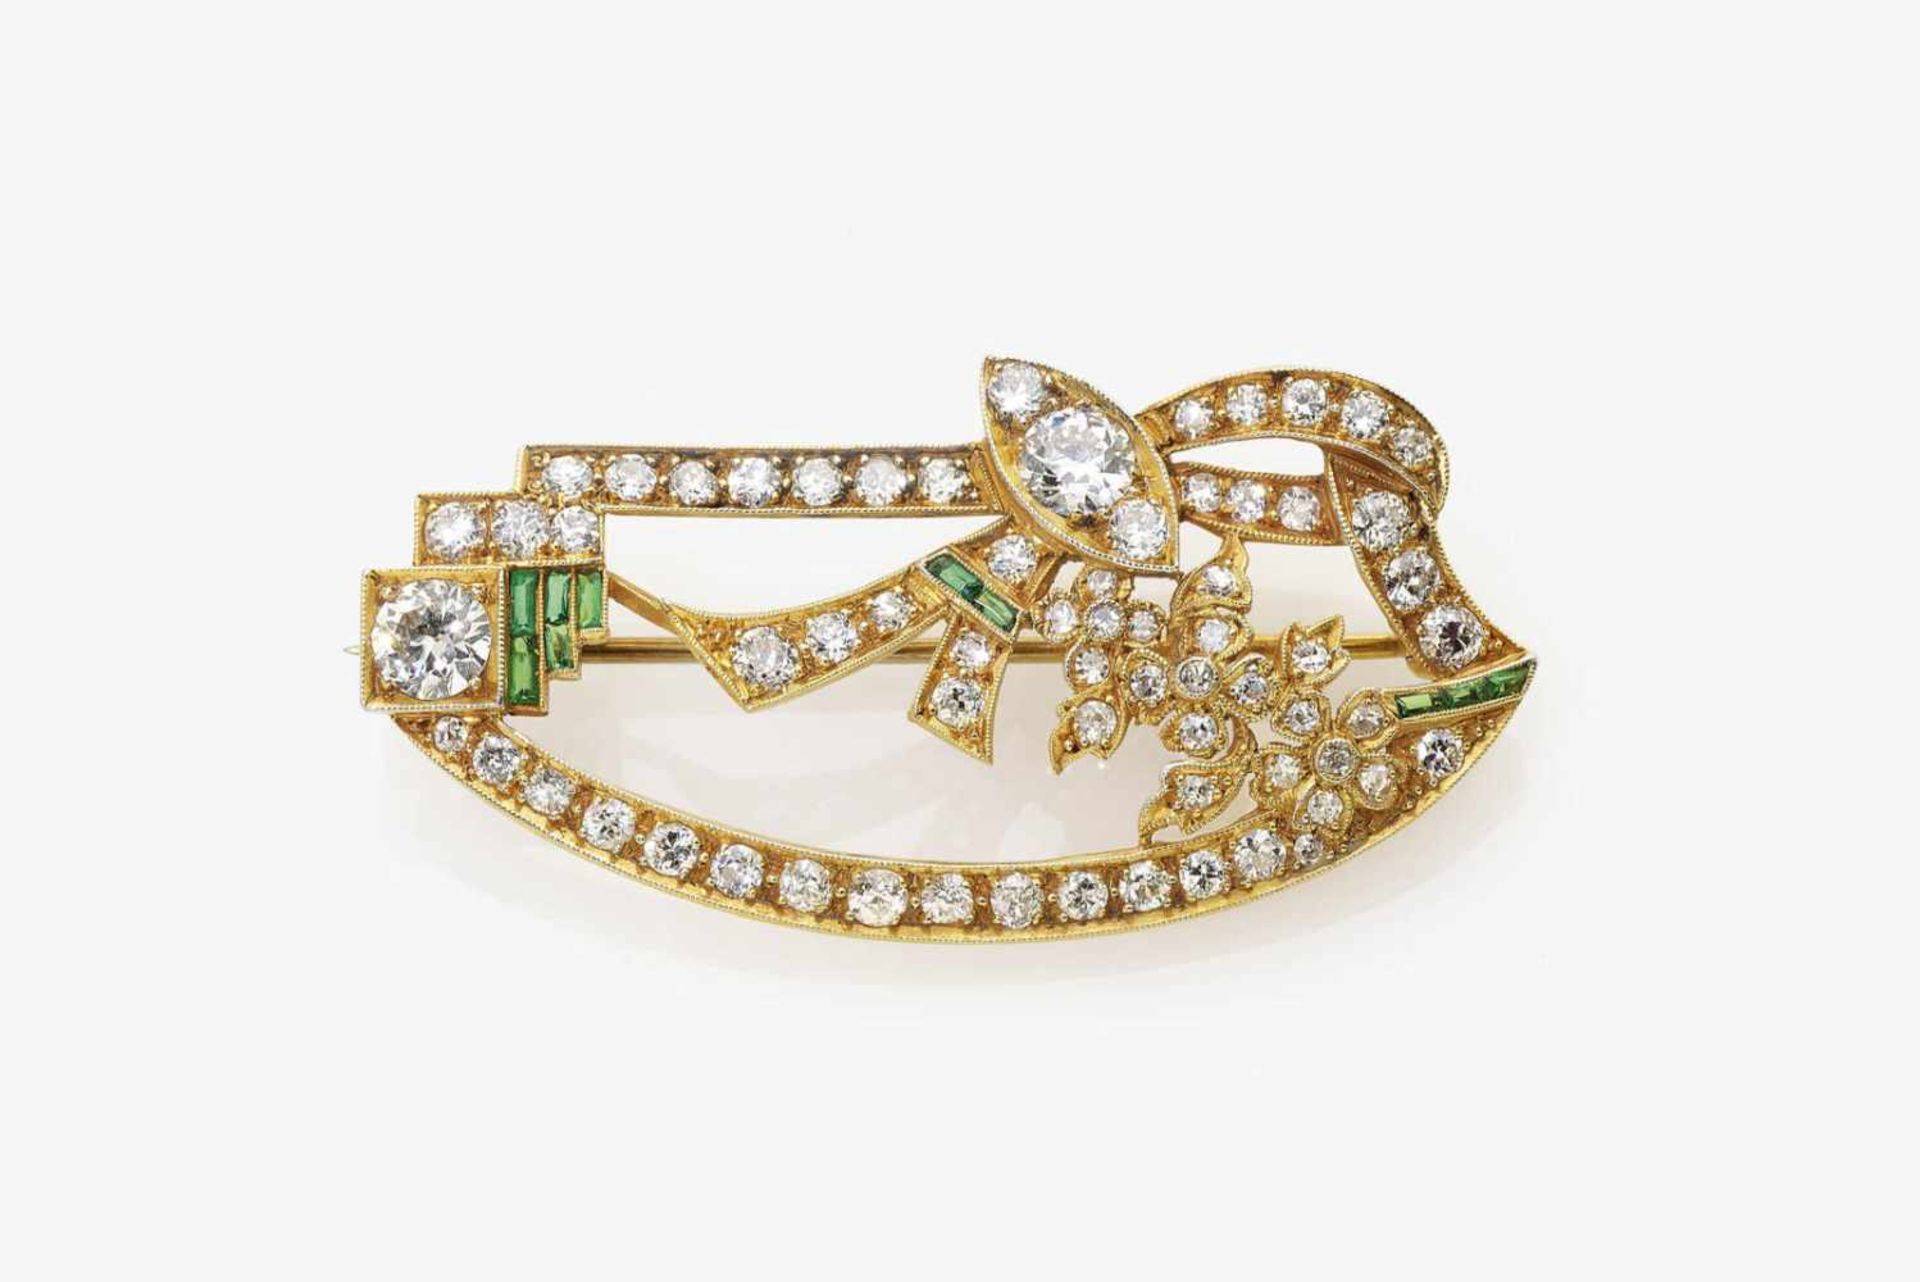 An Emerald and Diamond stylised Floral Brooch